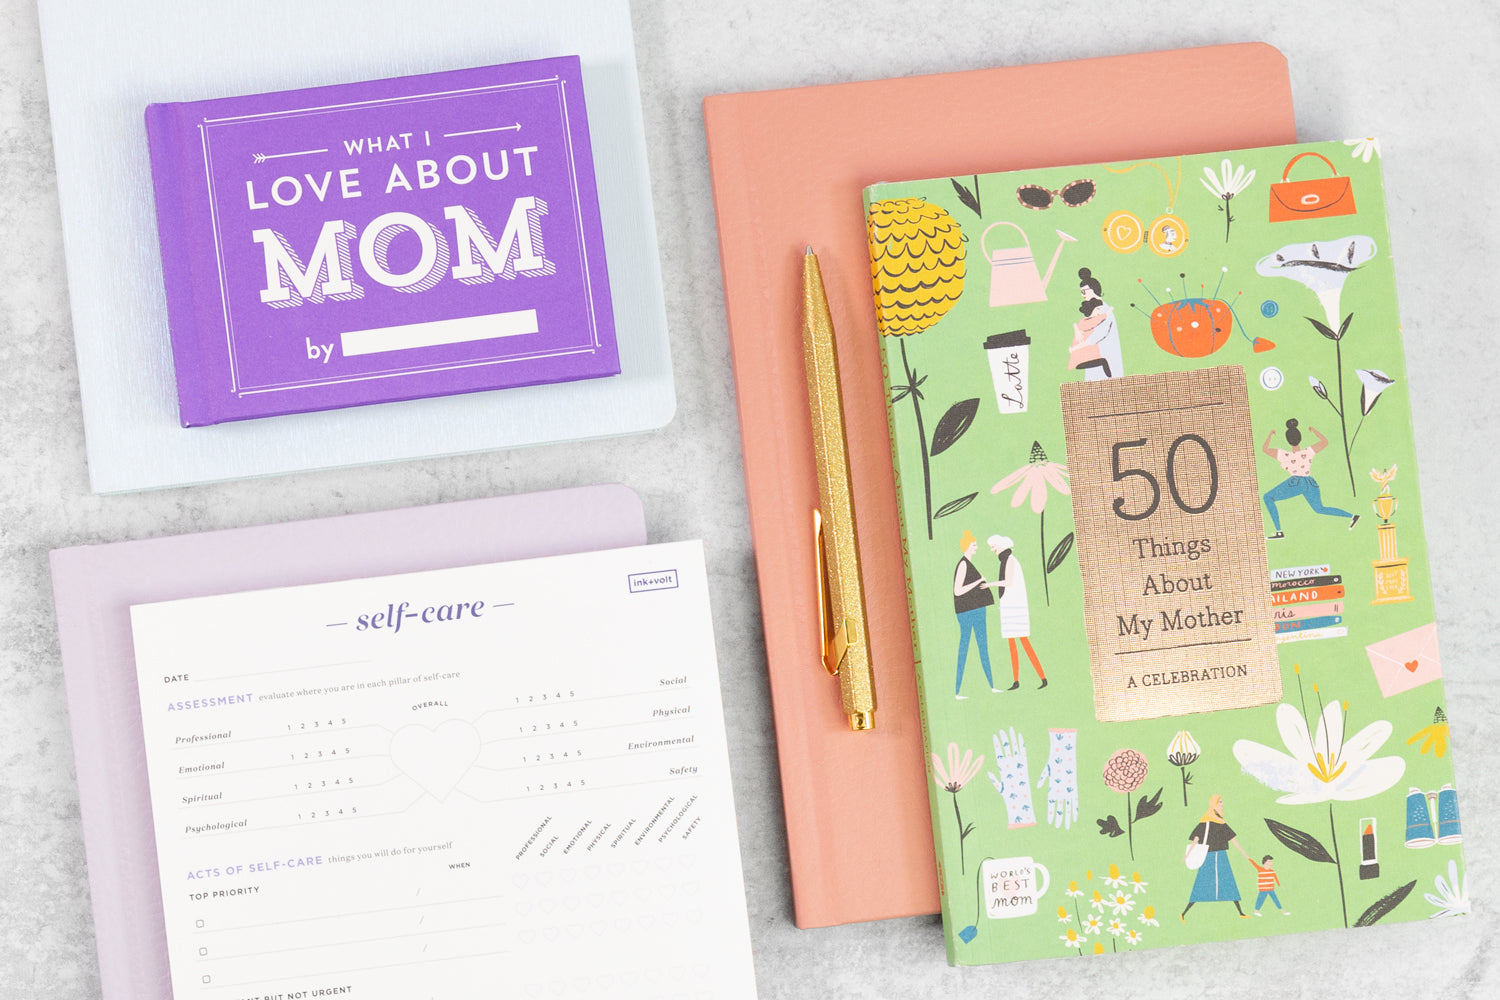 A colorful array of mother's day gifts, including books and notepads.